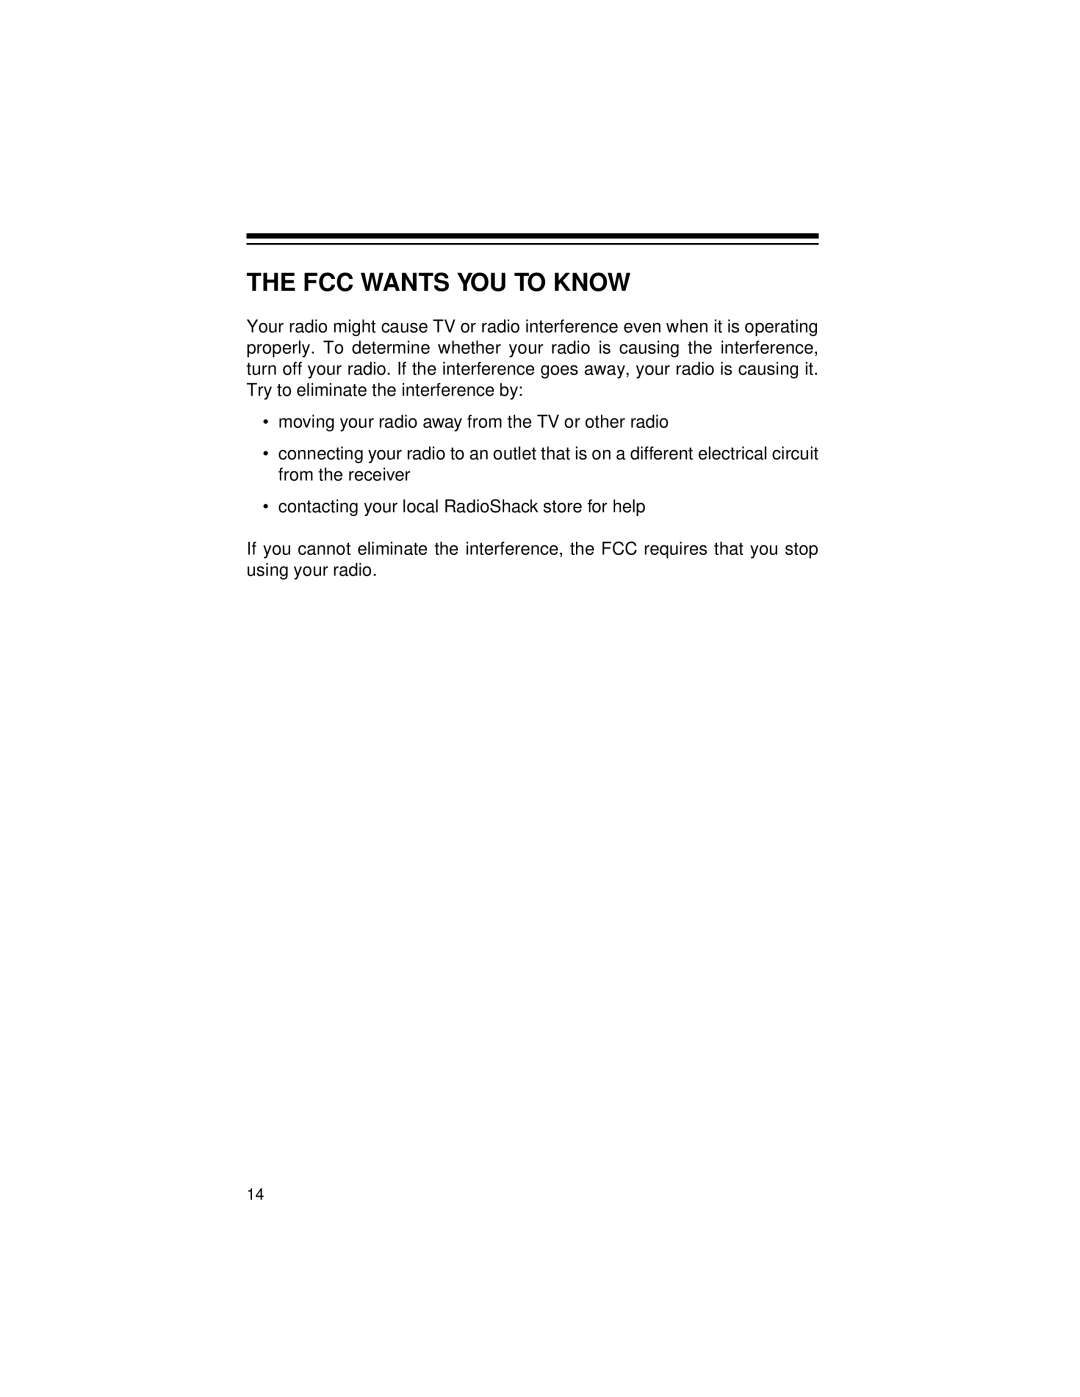 Radio Shack Radio owner manual The Fcc Wants You To Know 